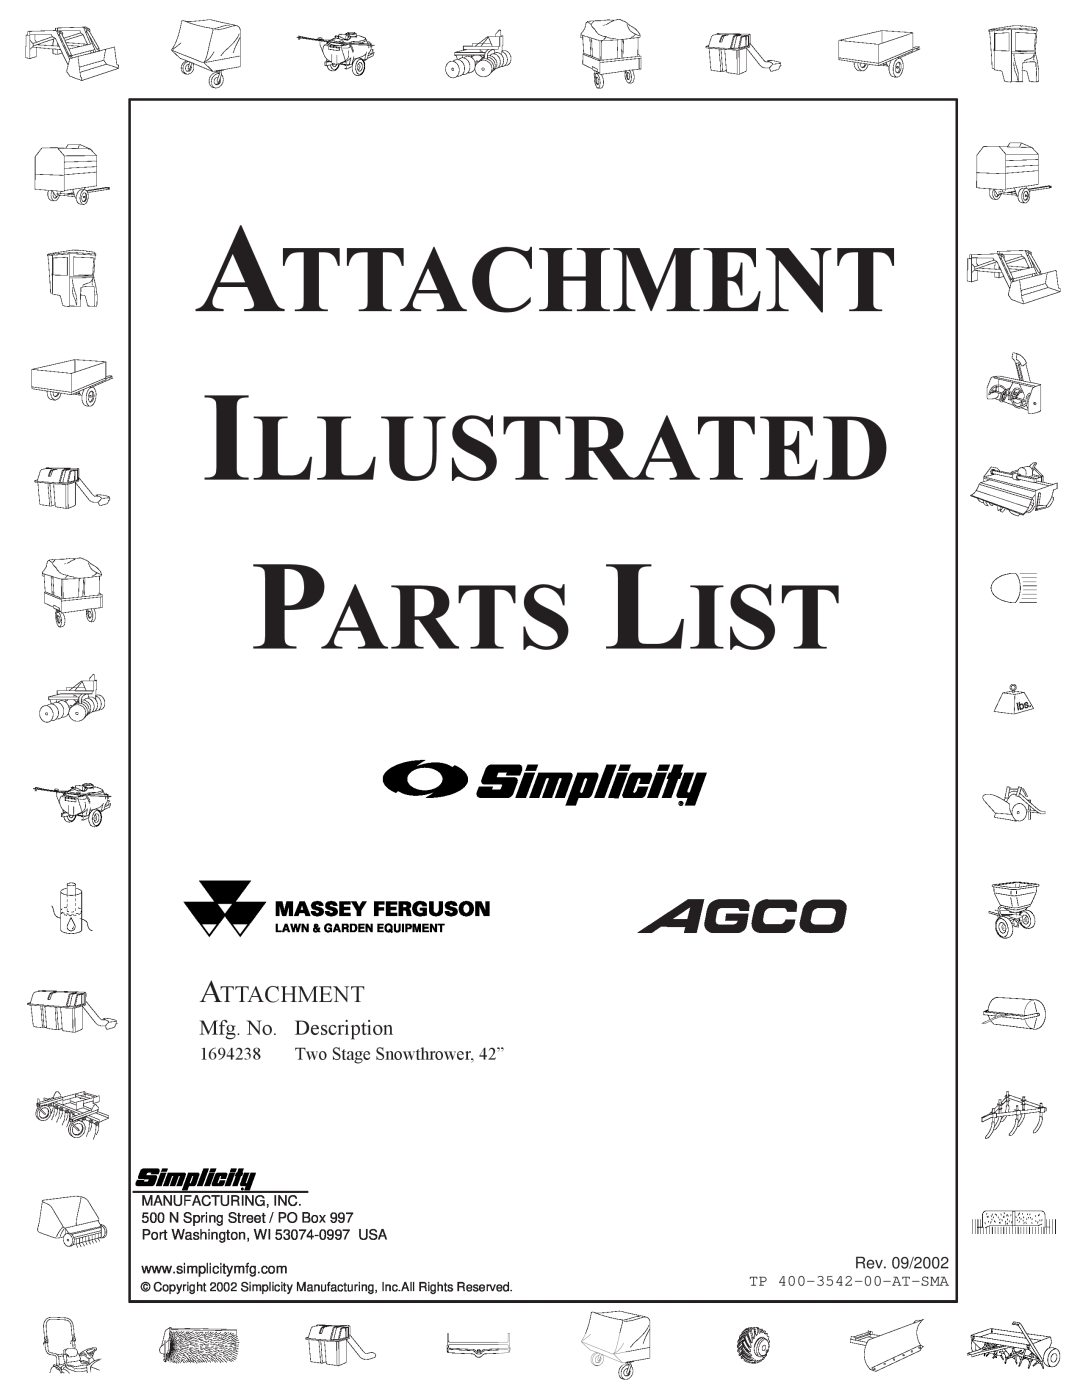 Simplicity 1694238 manual Attachment Illustrated Parts List, Mfg. No. Description, Two Stage Snowthrower, 42” 